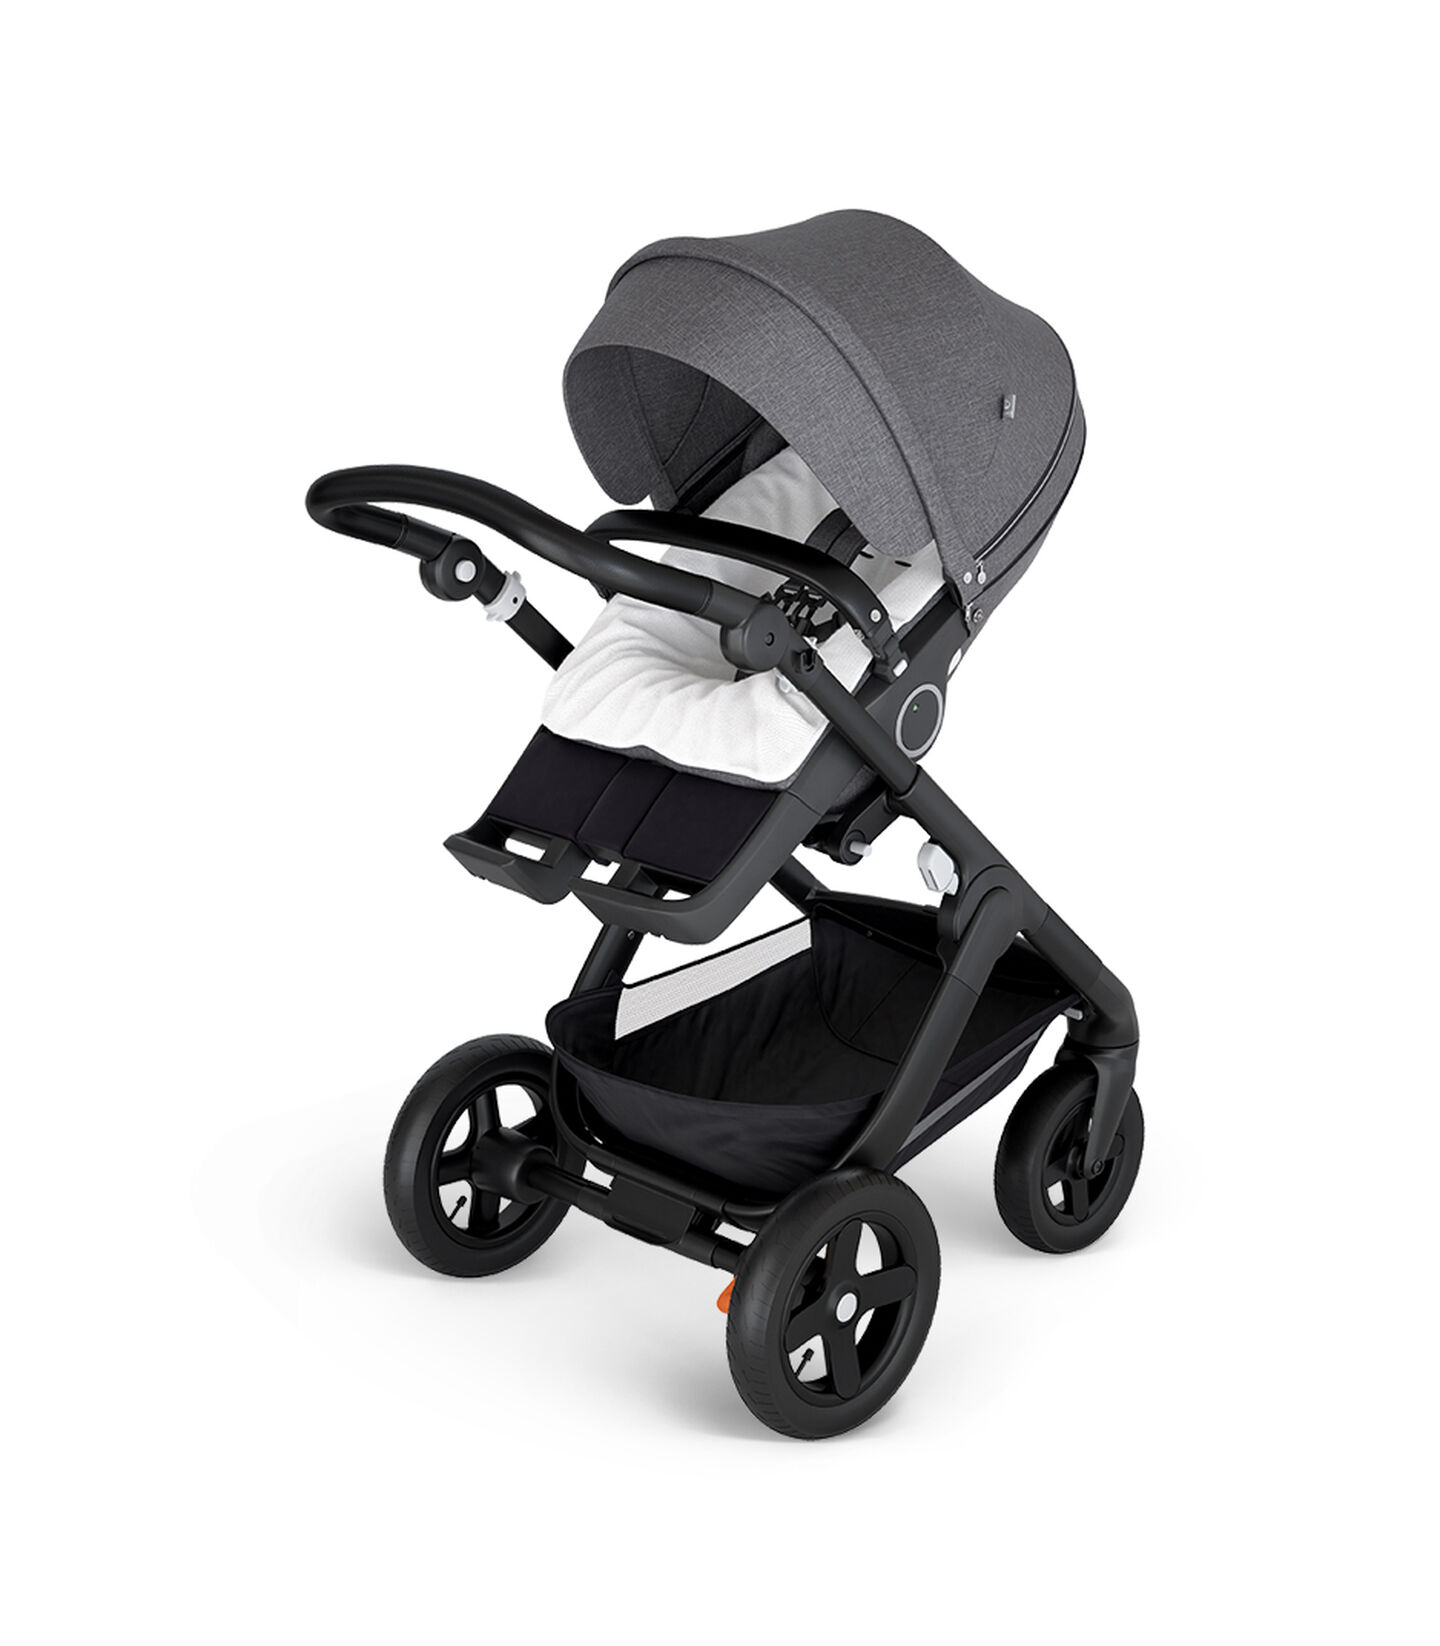 Stokke® Trailz™ with Black Chassis and Stokke® Stroller Seat Black Melange. Stokke® Stroller Terry Cloth Cover. view 2